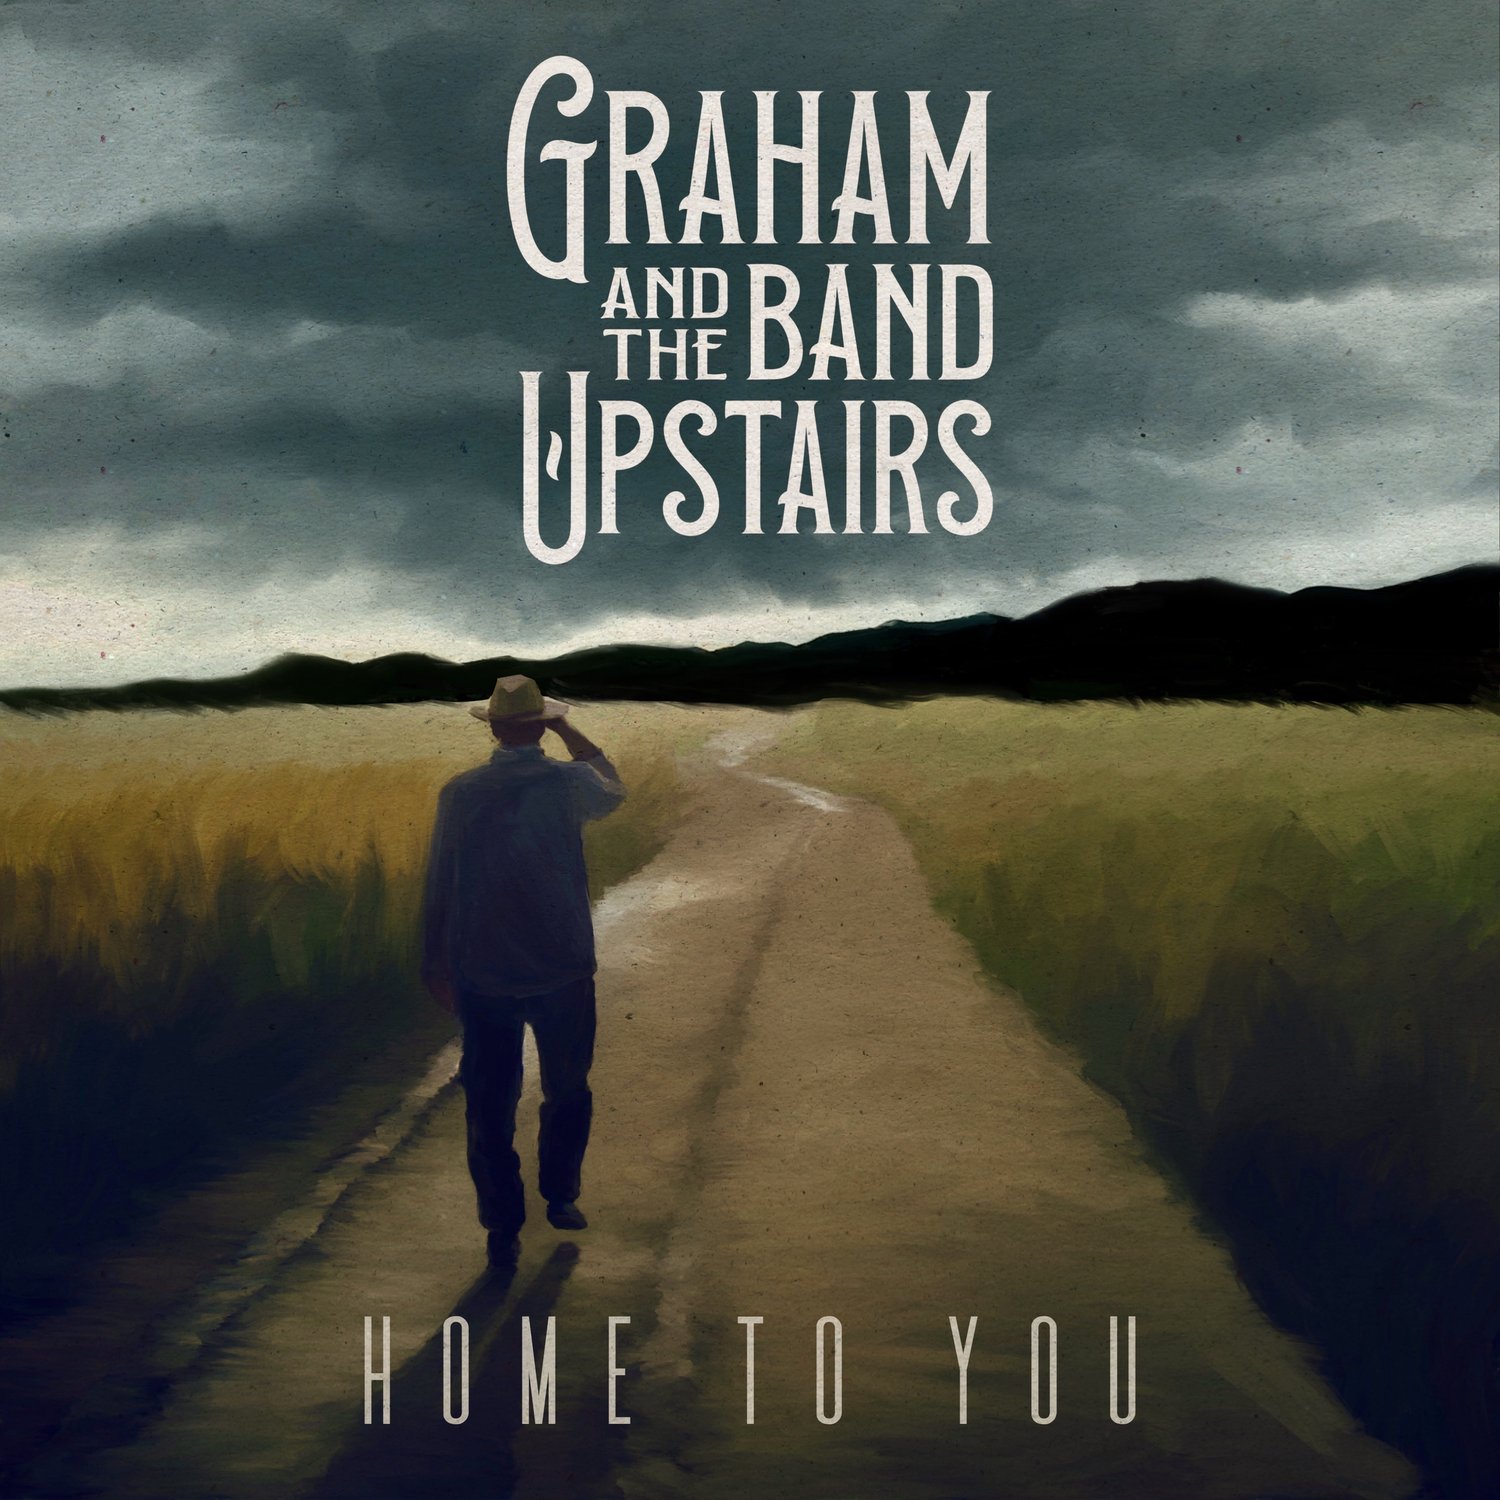 Artwork for the single “Home To You” by Graham and The Band Upstairs